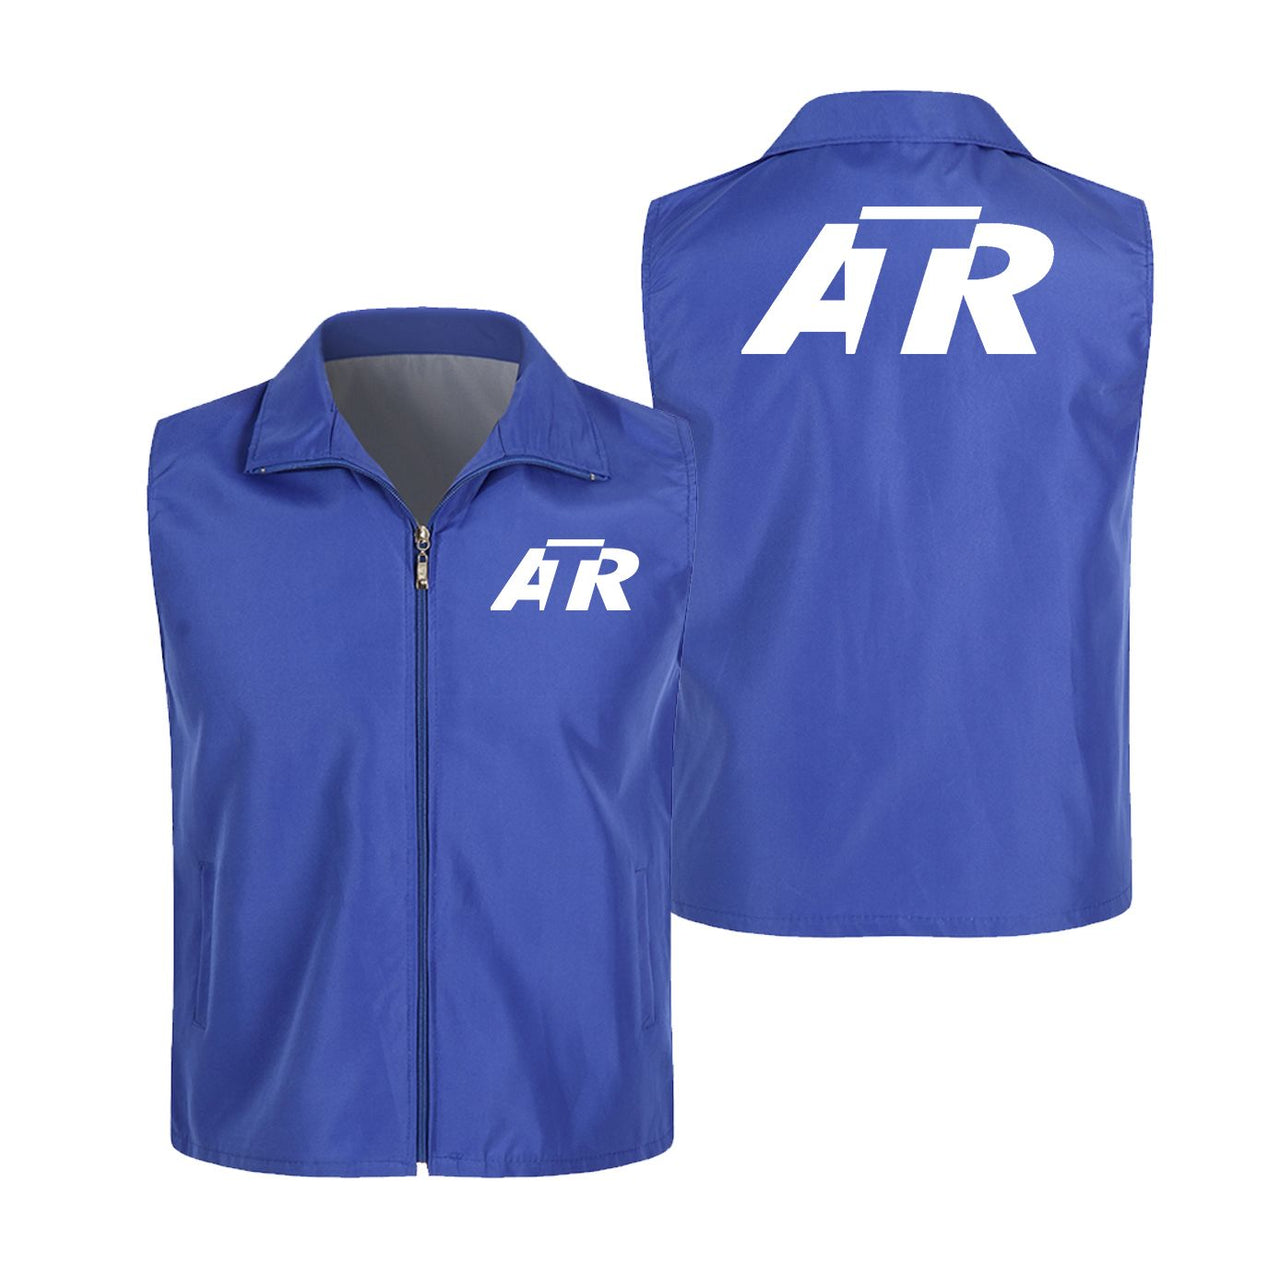 ATR & Text Designed Thin Style Vests